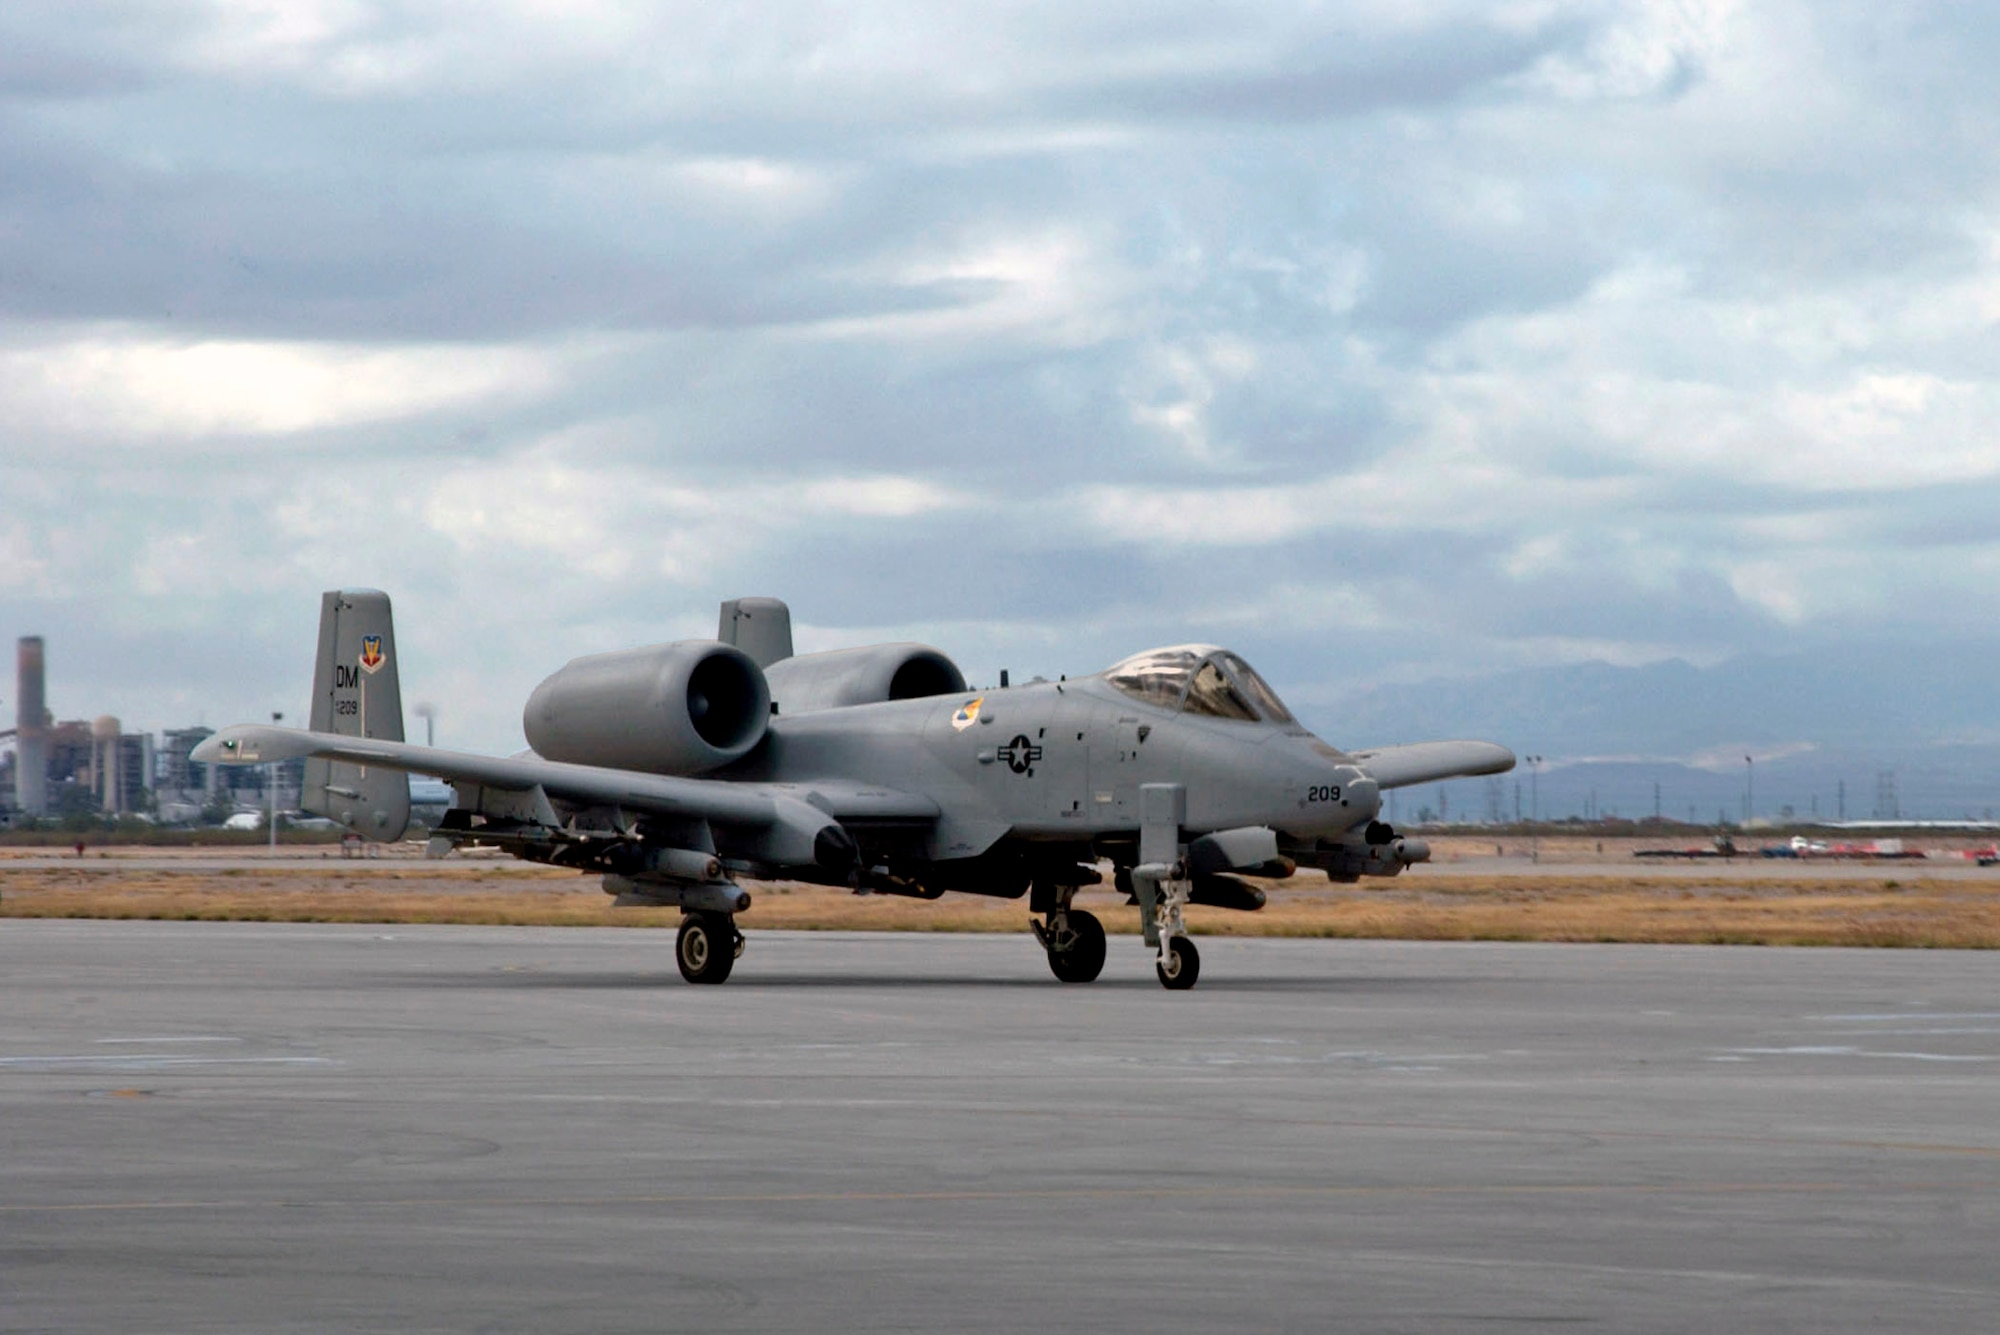 A newly modified A-10C Thunderbolt II taxis in during the roll-out ceremony Nov. 29 at Davis-Monthan Air Force Base, Ariz. The A-10 has been modified with precision engagement technology to create an improved A-10C. The enhancements include full integration of sensors, multi-functional color displays and a new hands-on-throttle-and-stick interface. (U.S. Air Force photo/Airman 1st Class Alesia Goosic)